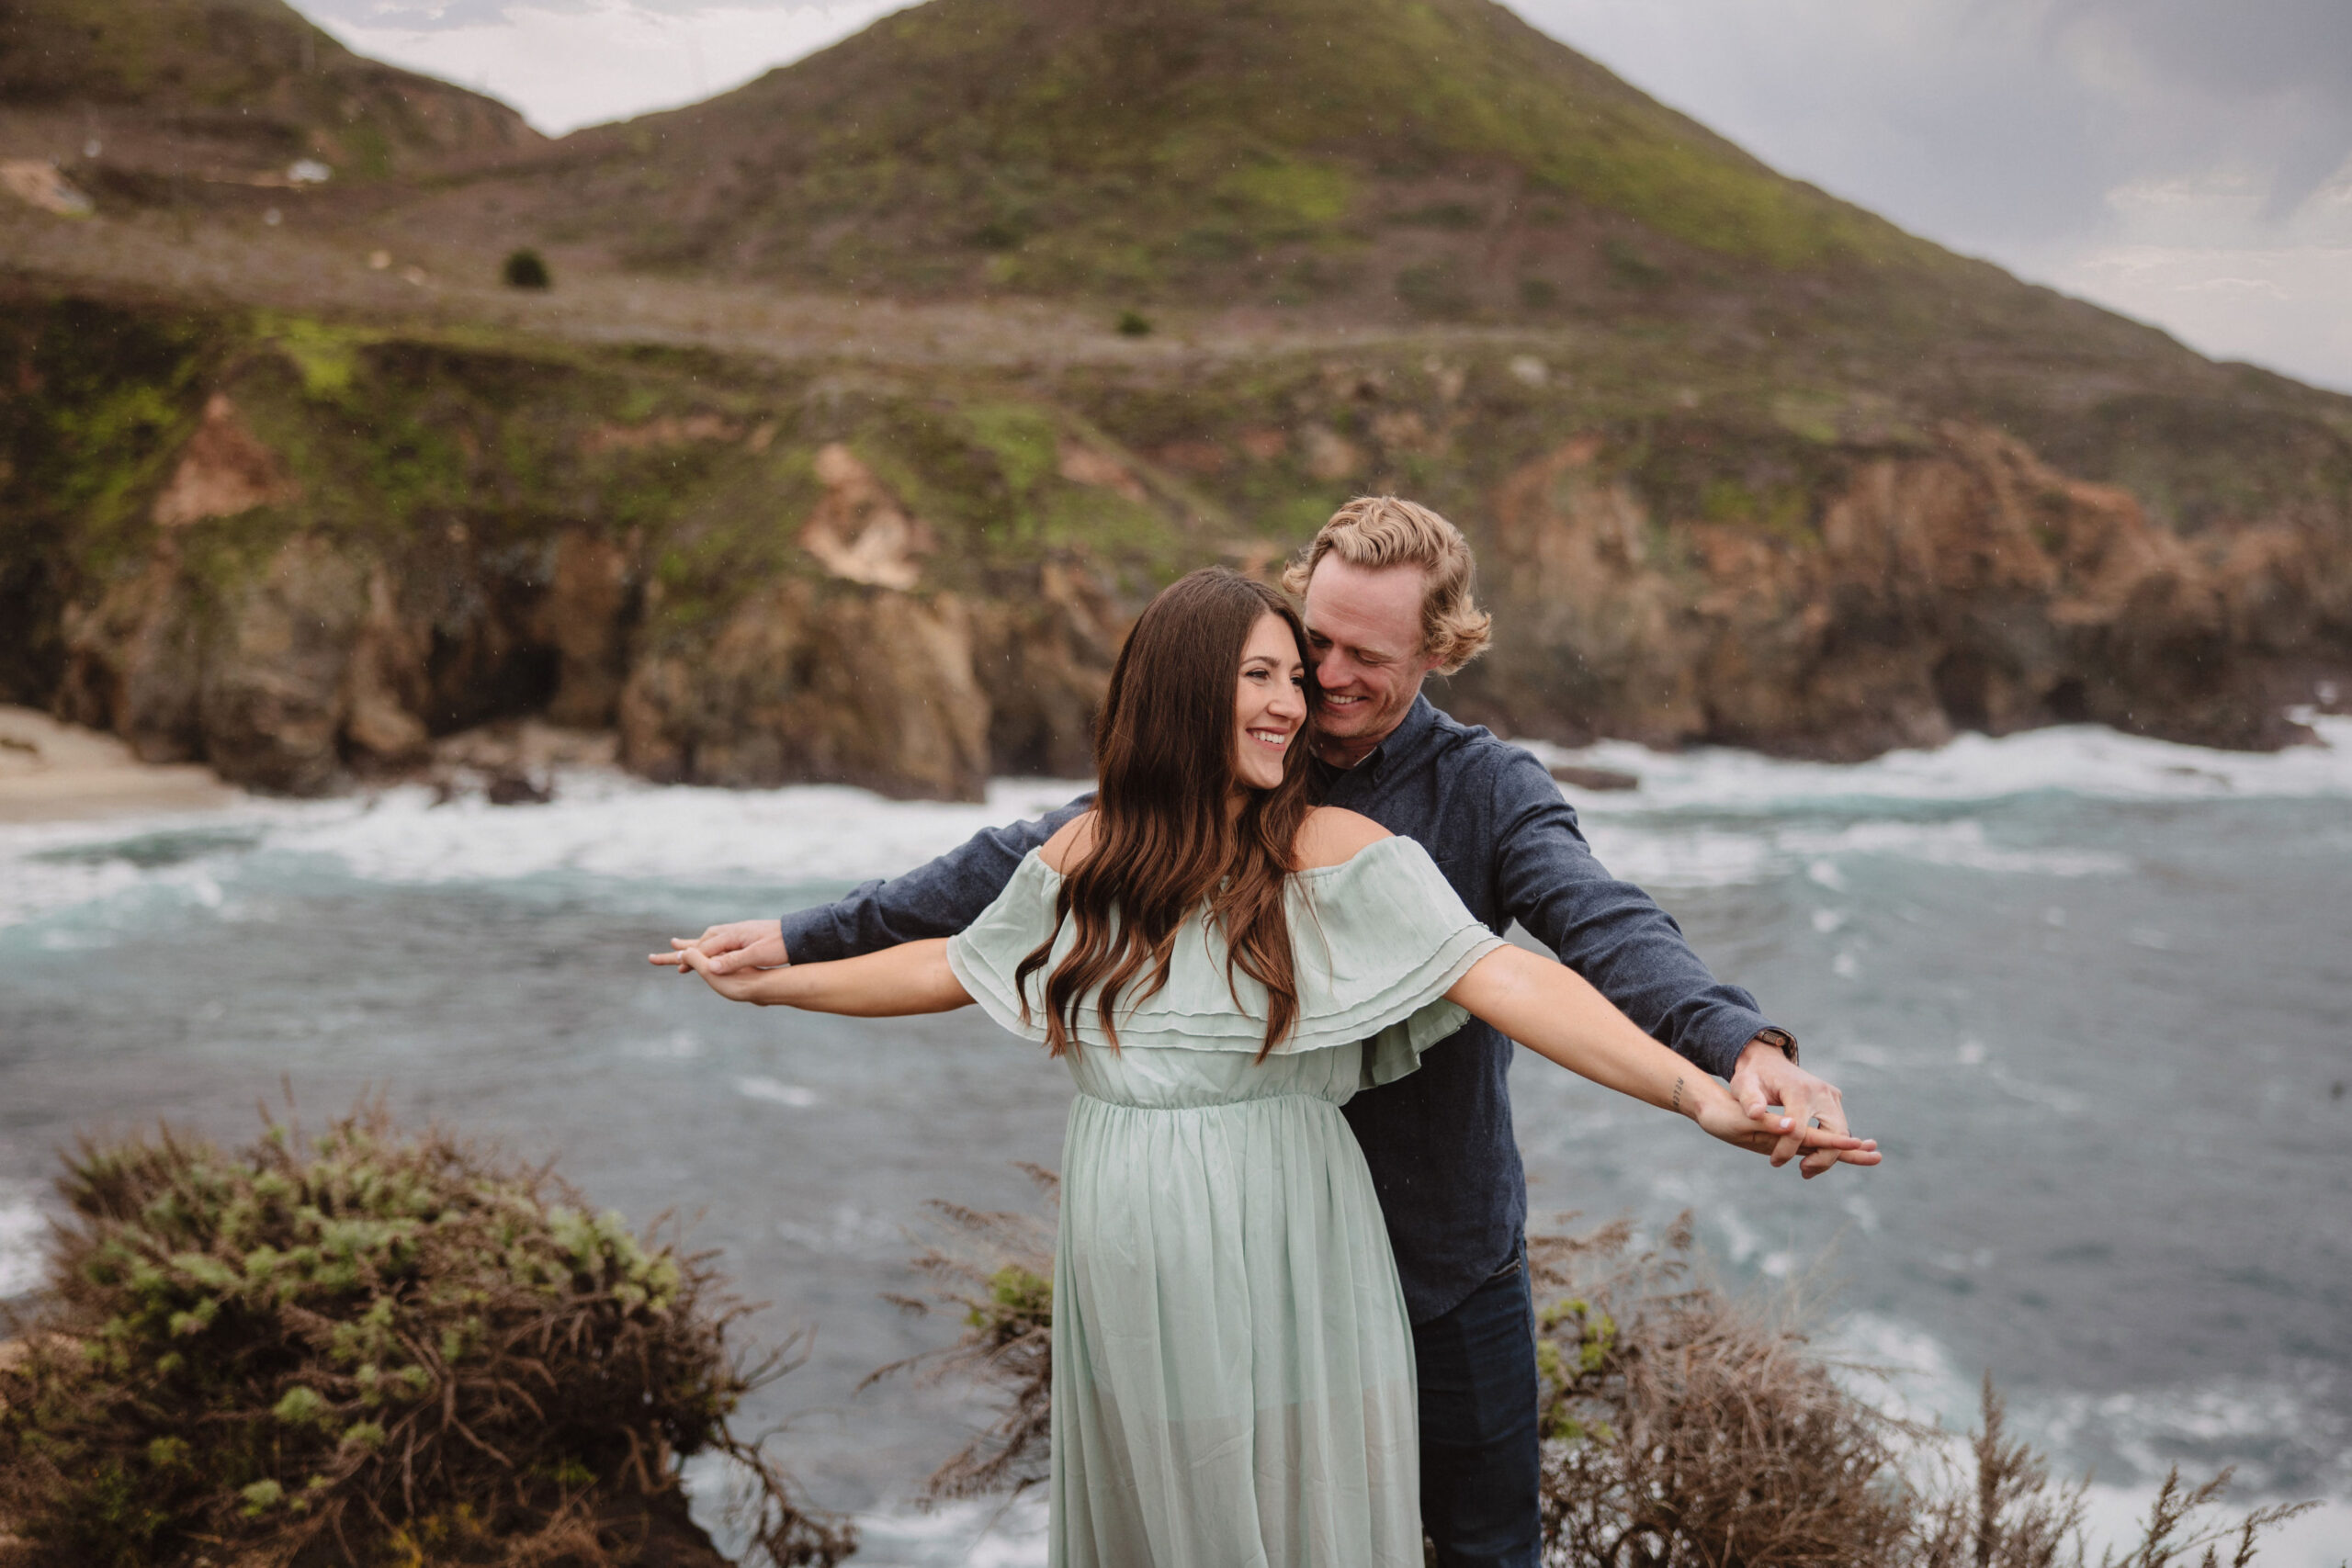 A couple embracing and smiling while standing on a coastal cliff with waves crashing against rocks in the background.